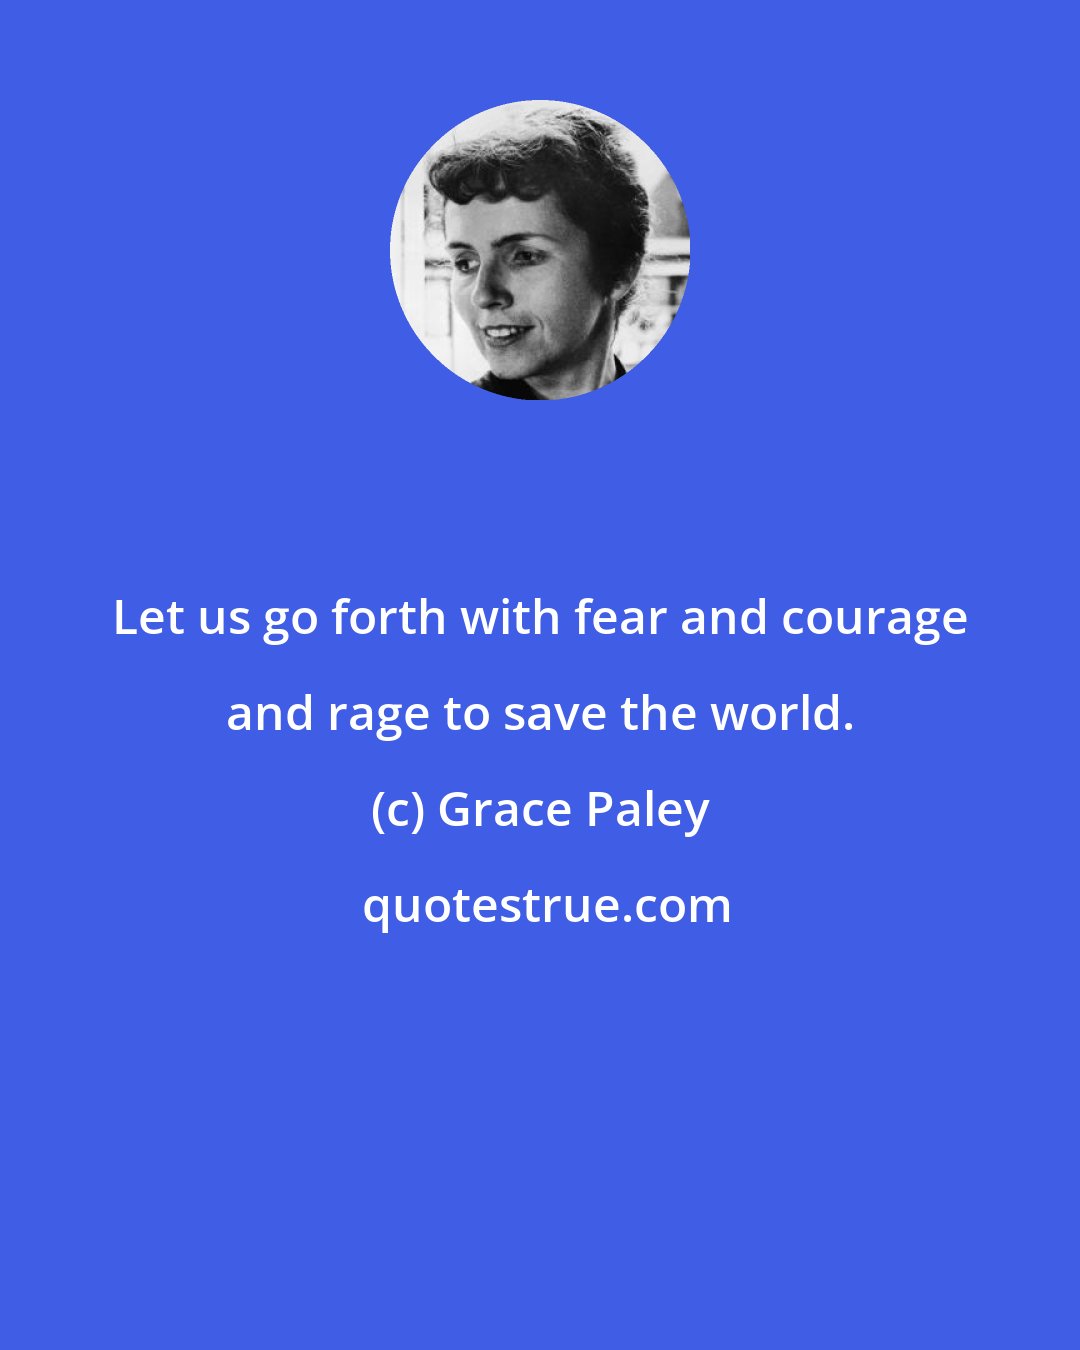 Grace Paley: Let us go forth with fear and courage and rage to save the world.